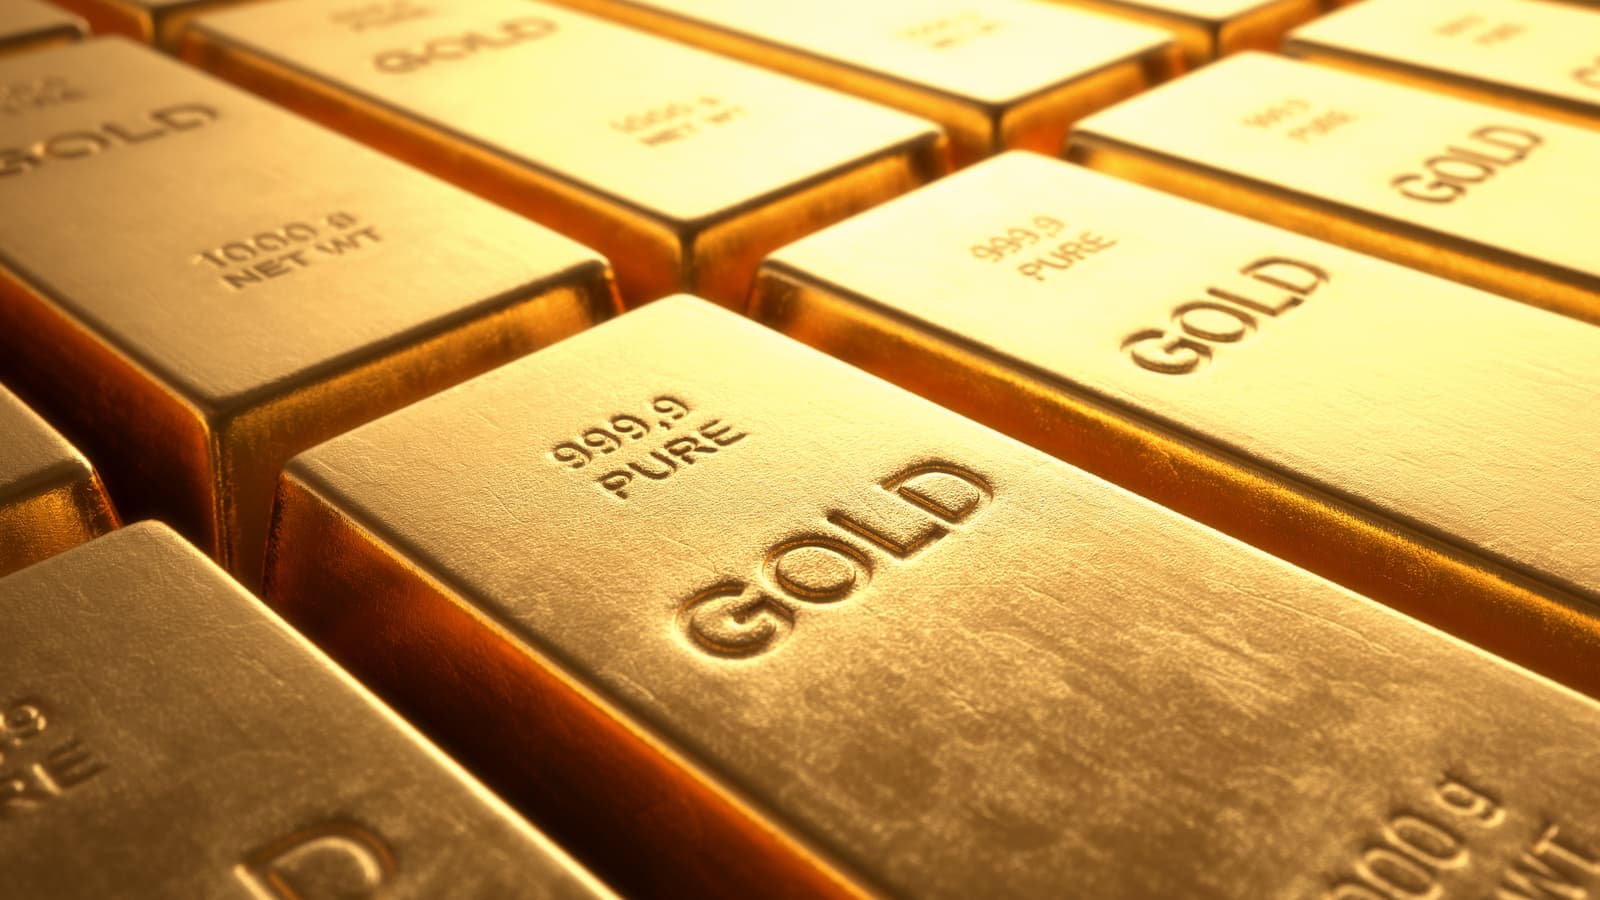 Gold Investing Options for Seniors: IRAs, Physical Gold, Mining Stocks, and Mutual Funds